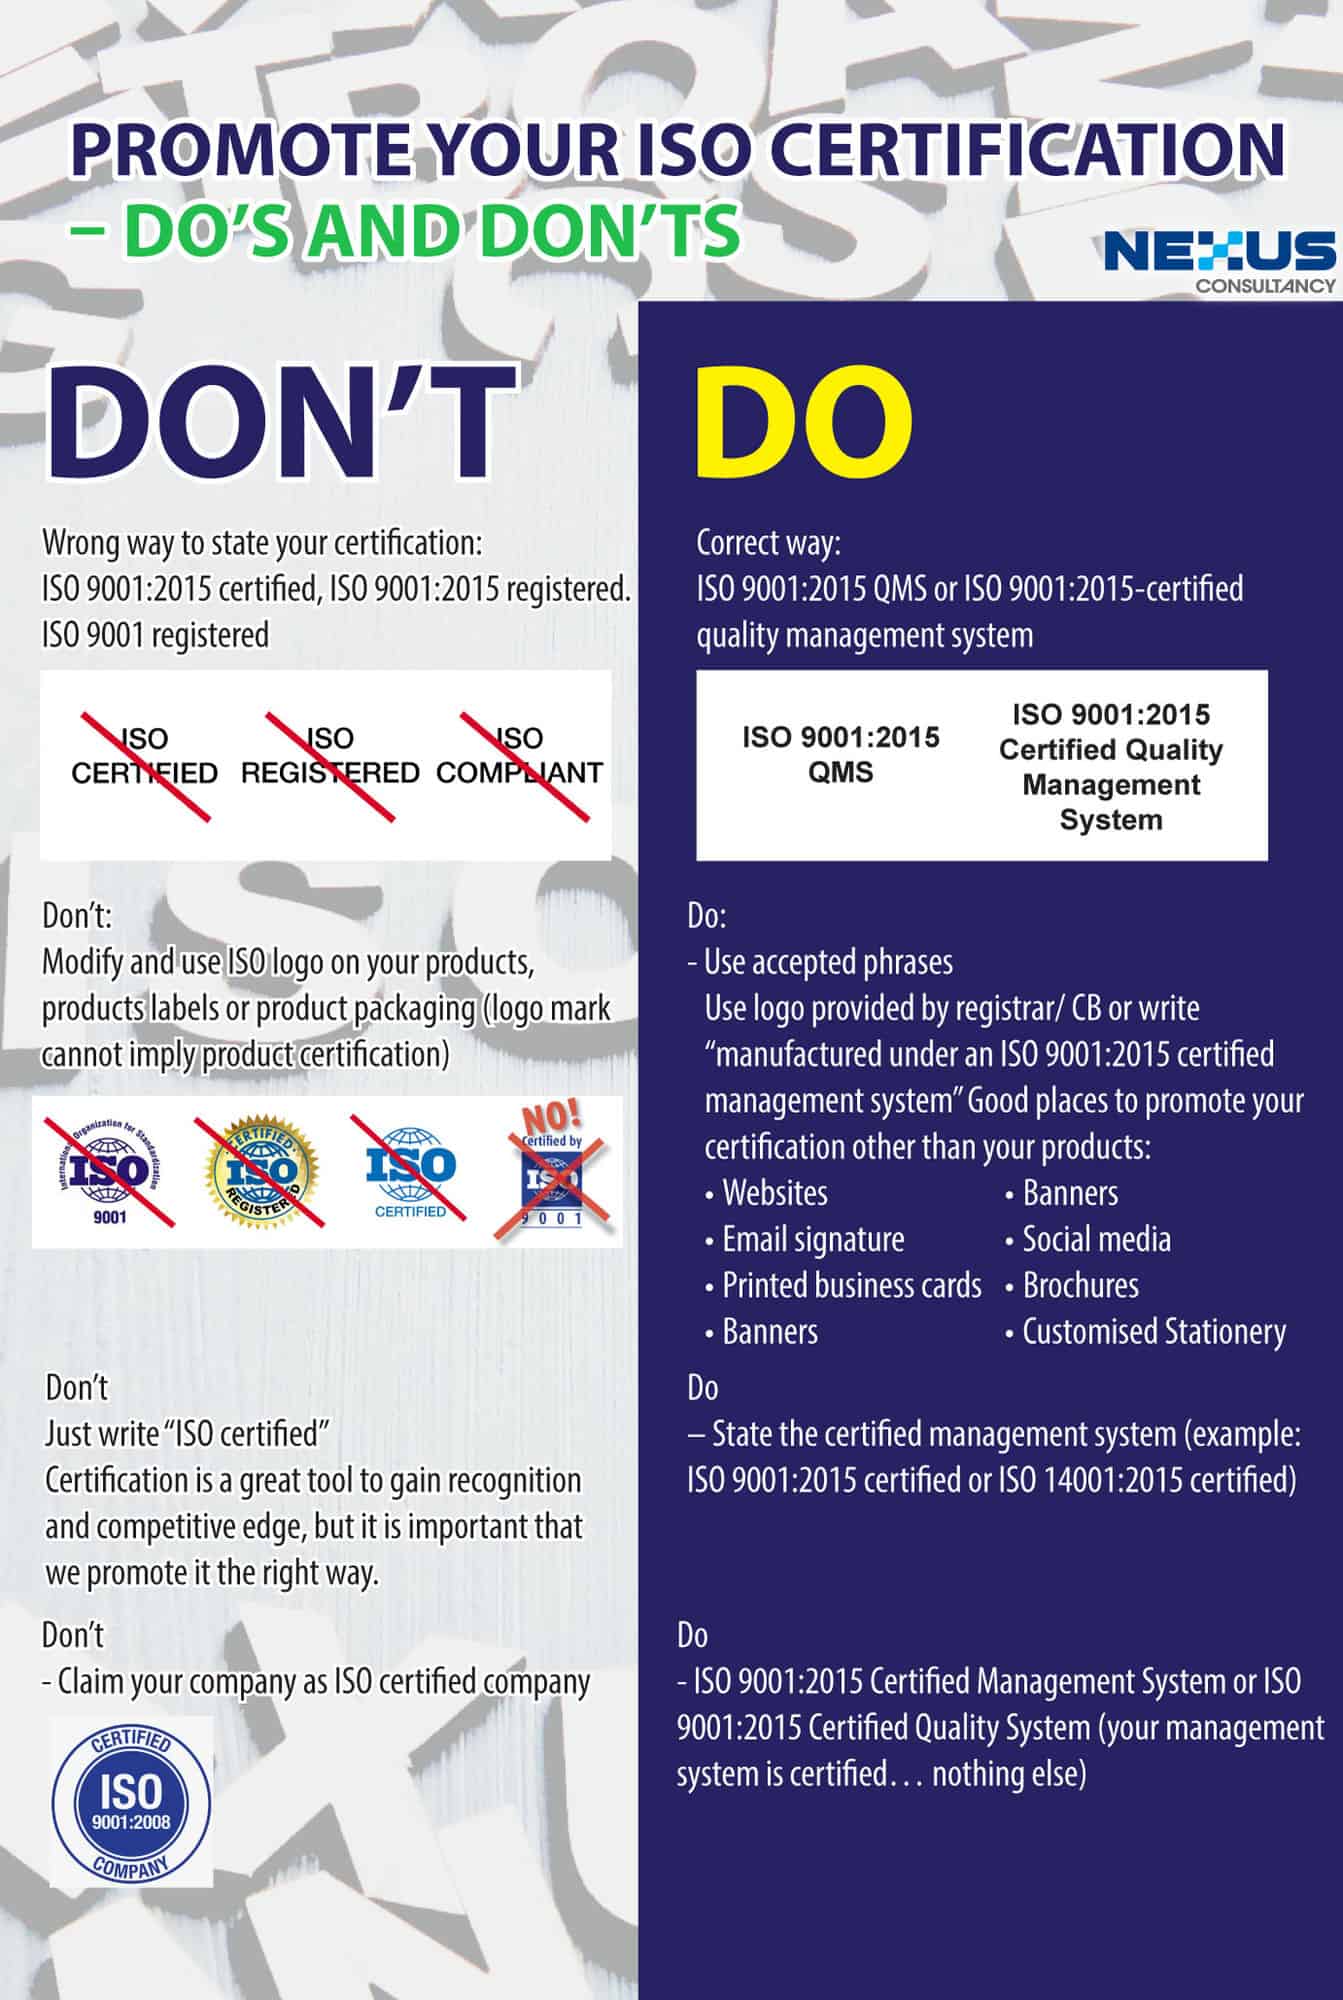 Do's and don'ts to promote your ISO certification